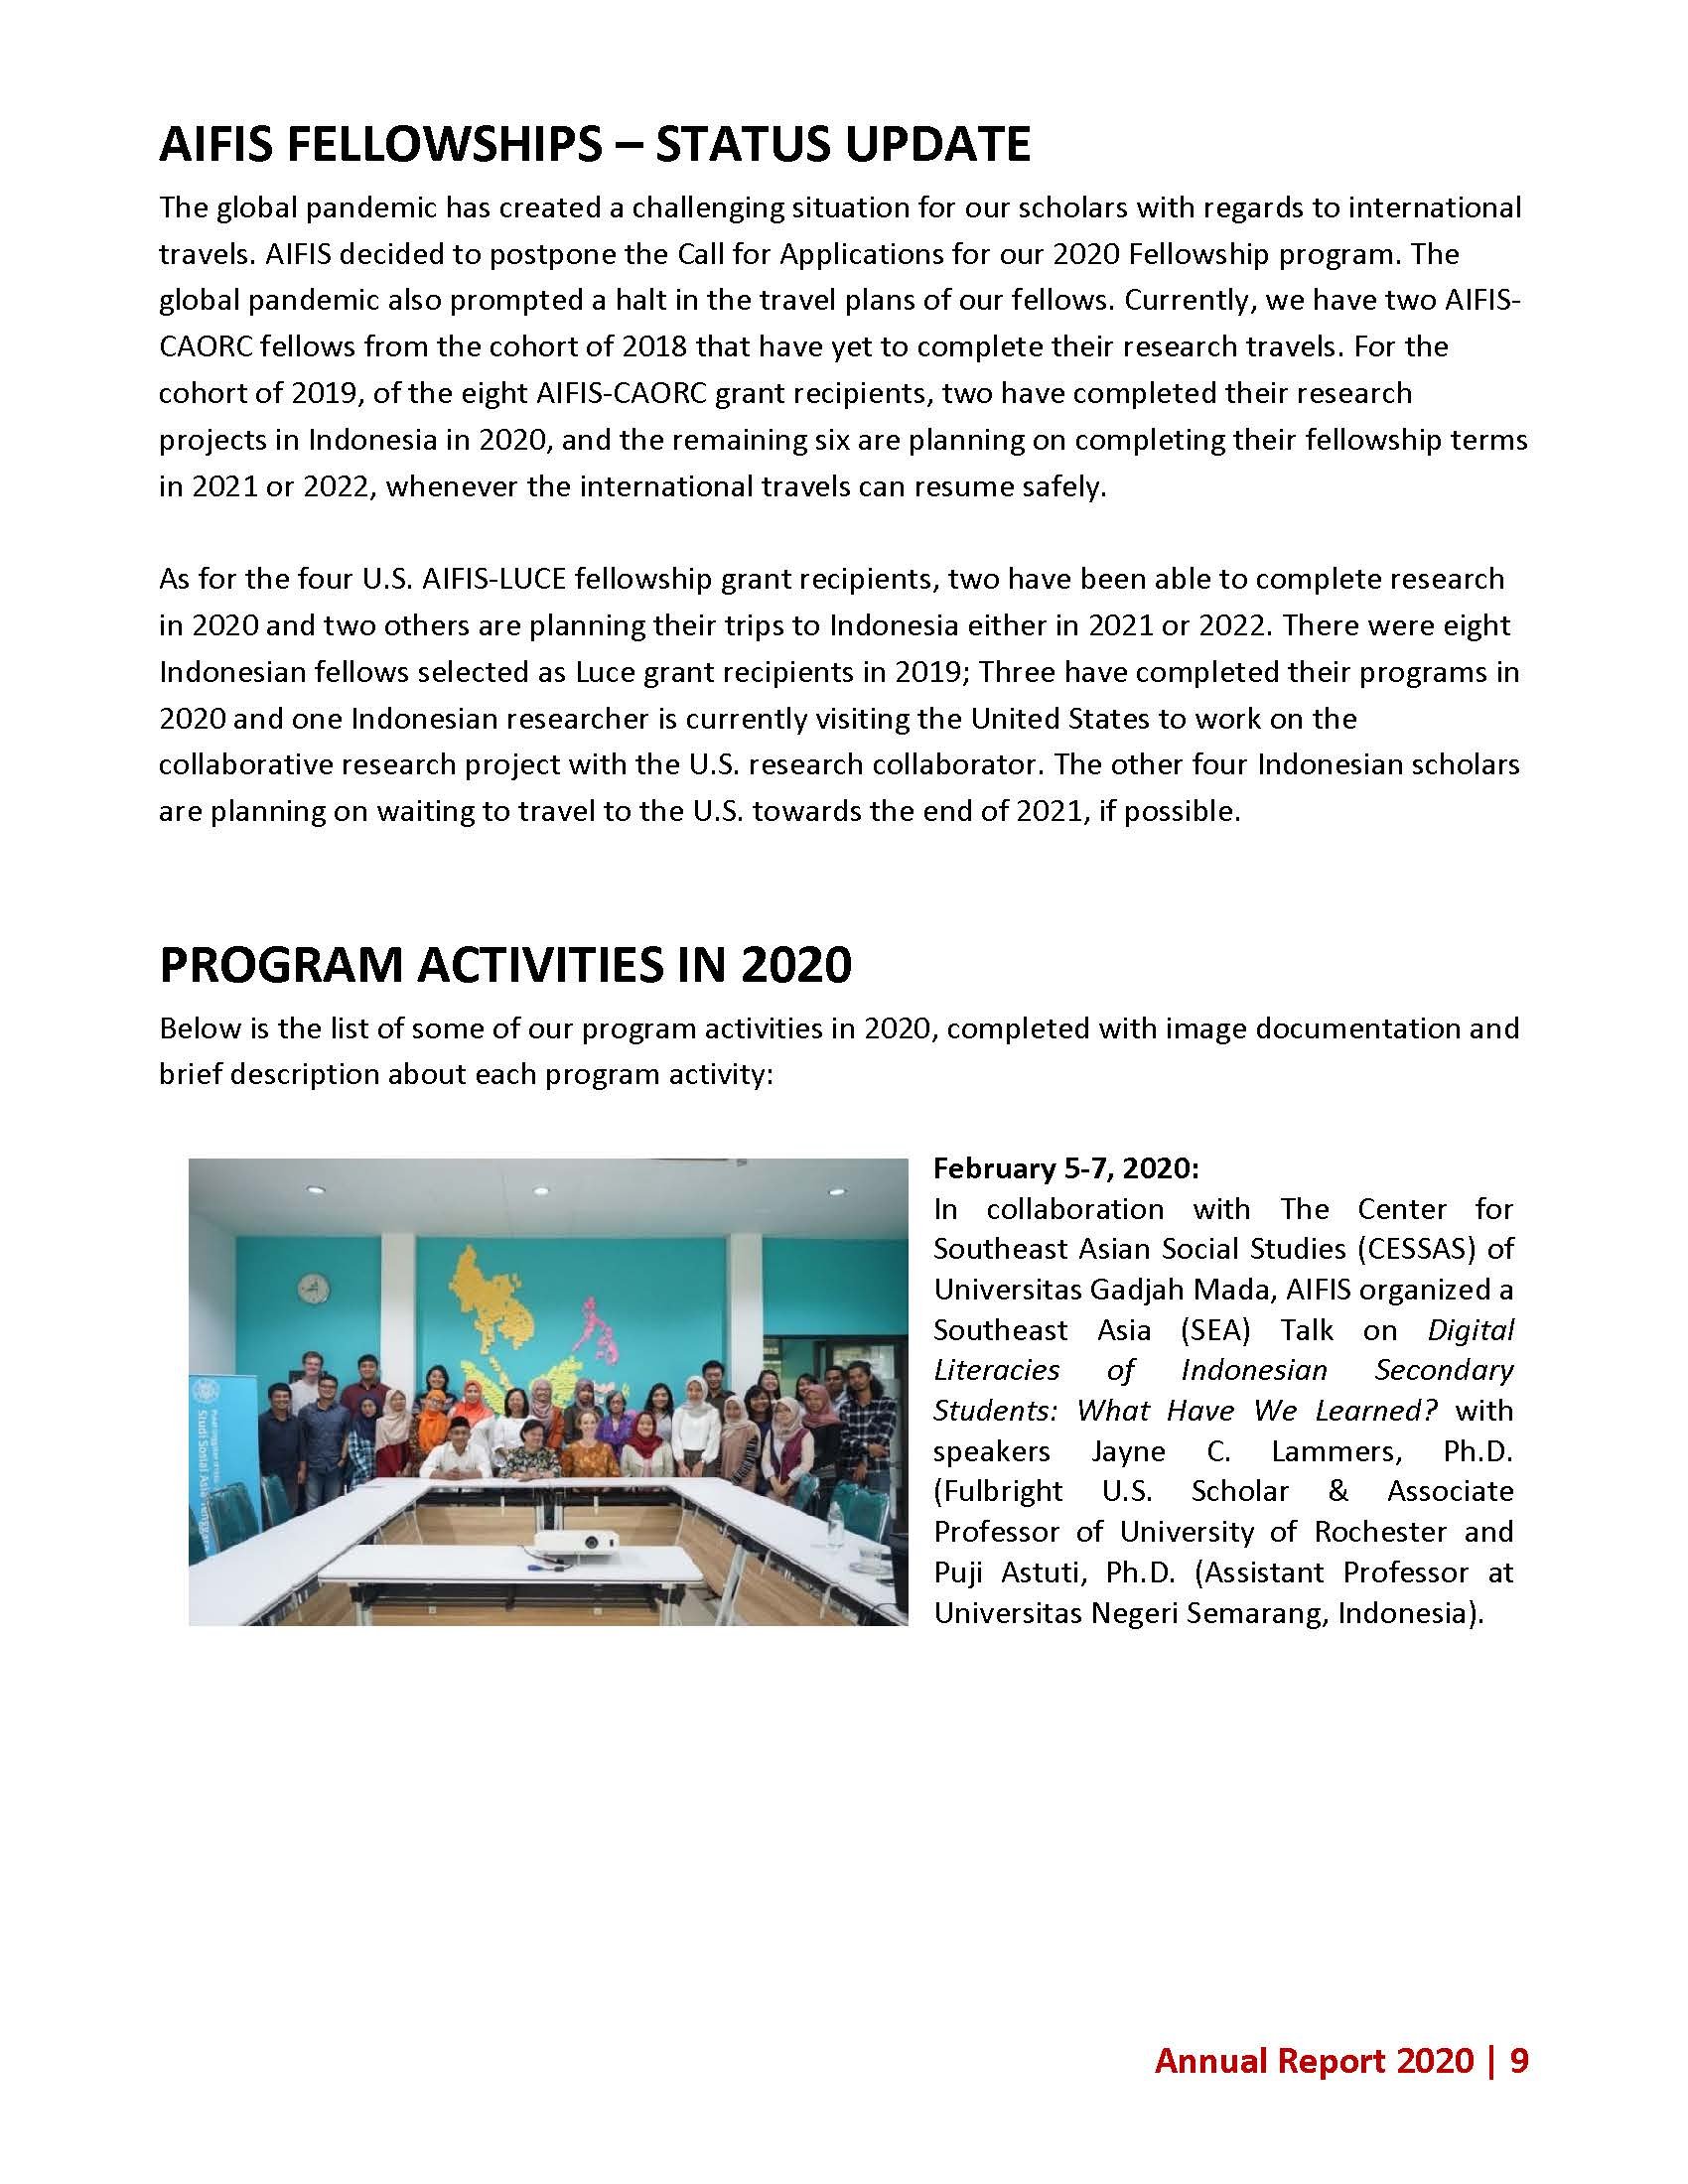 AIFIS_Annual+Report+2020_FINAL_Page_12.jpg